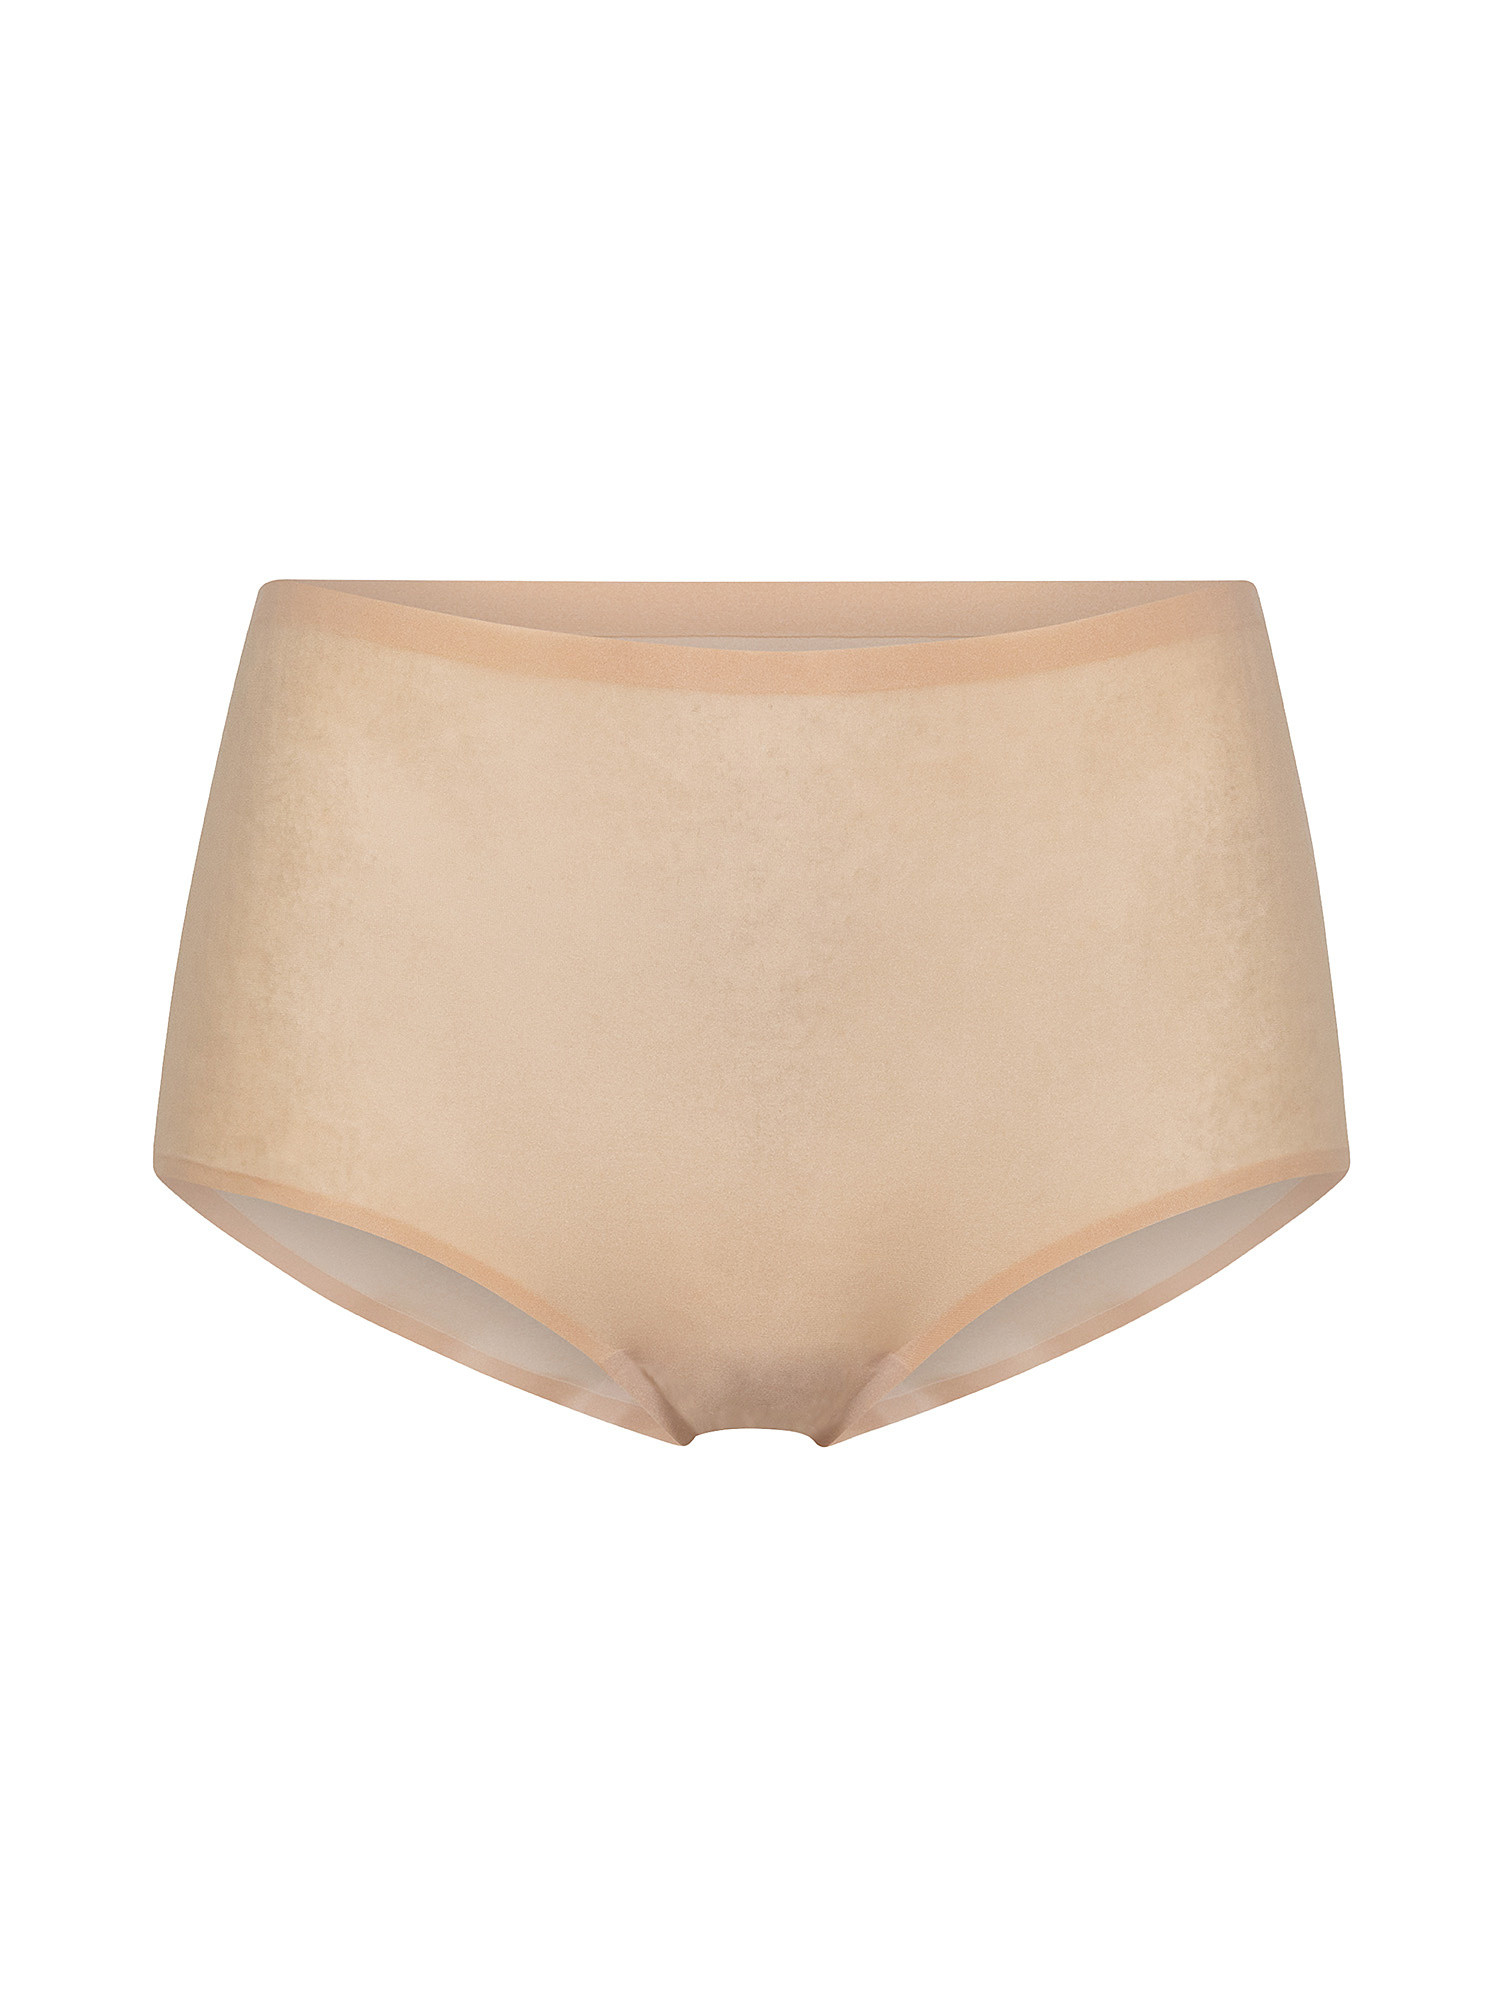 High-waisted culottes, Beige, large image number 0